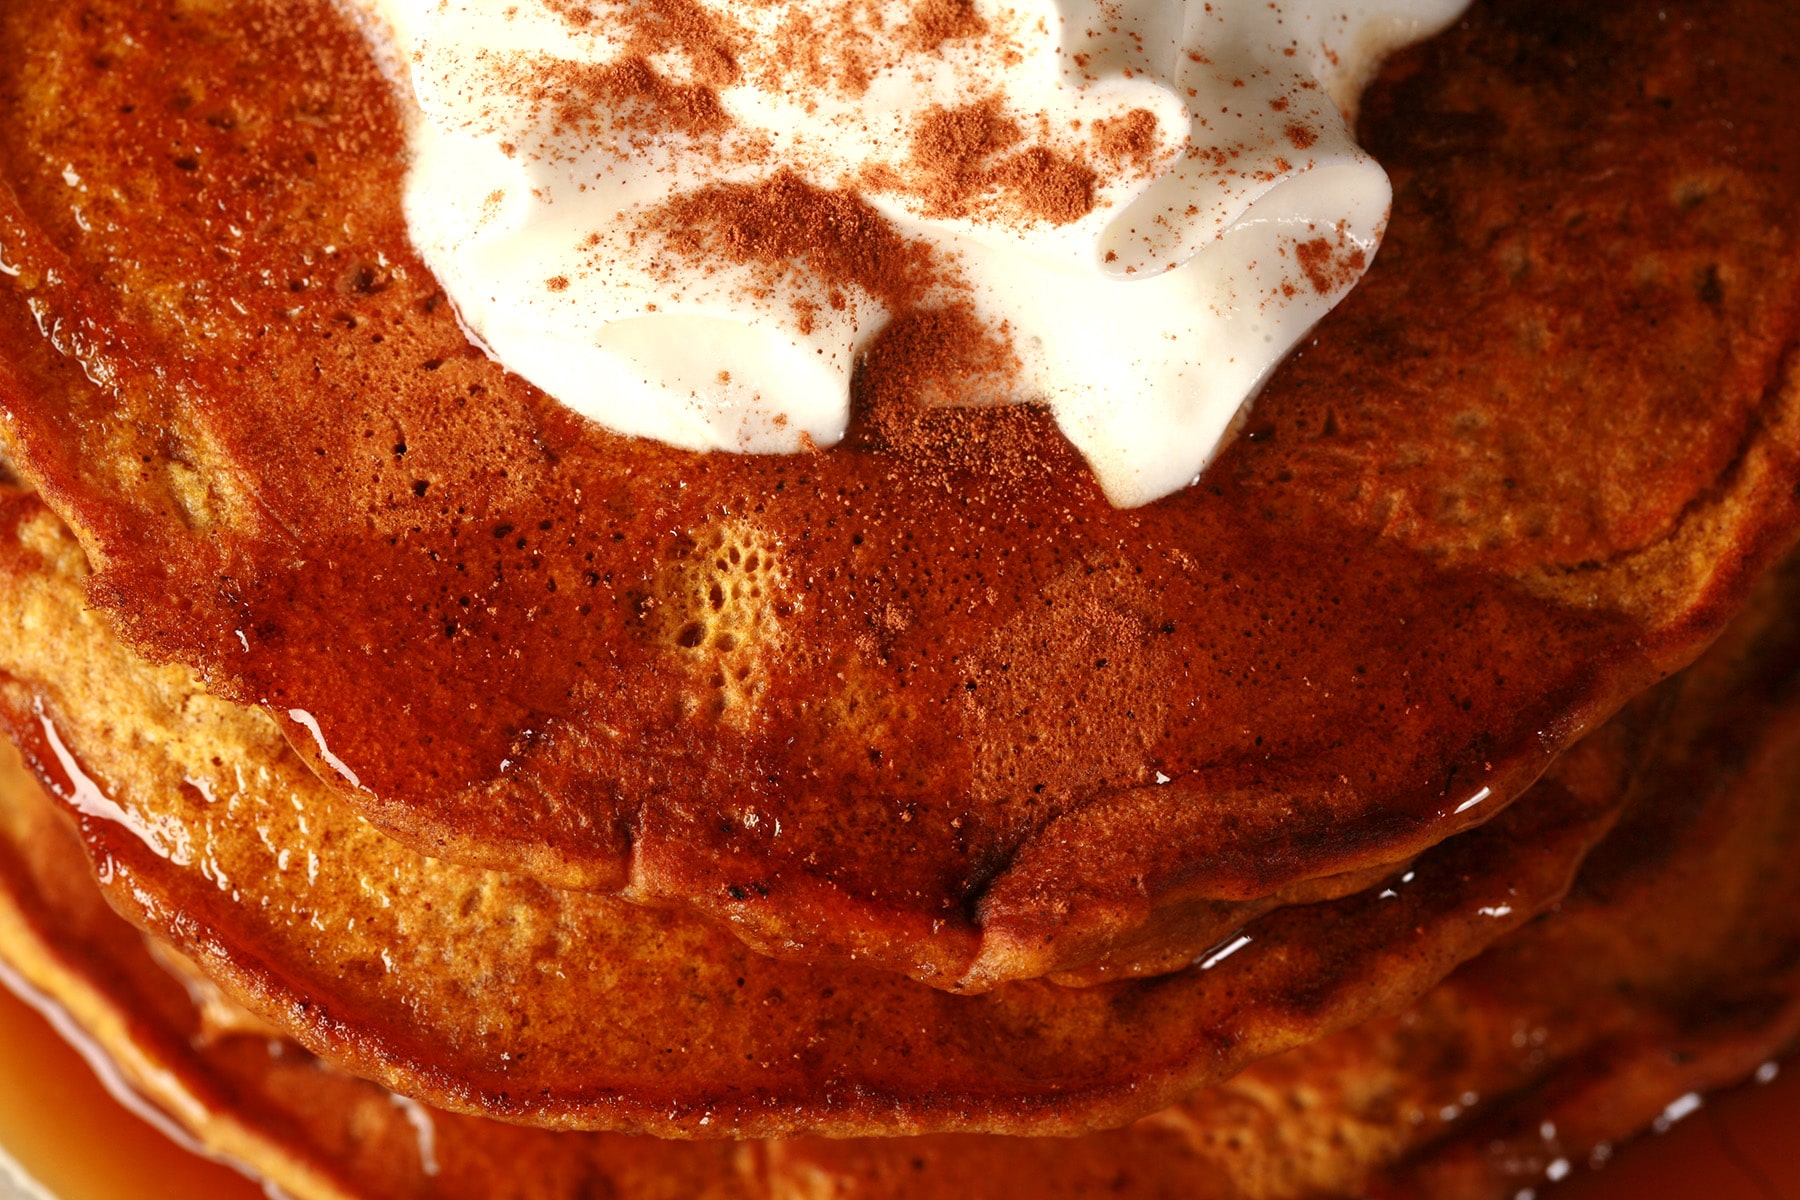 A tall stack of pumpkin pancakes, topped with whipped cream.